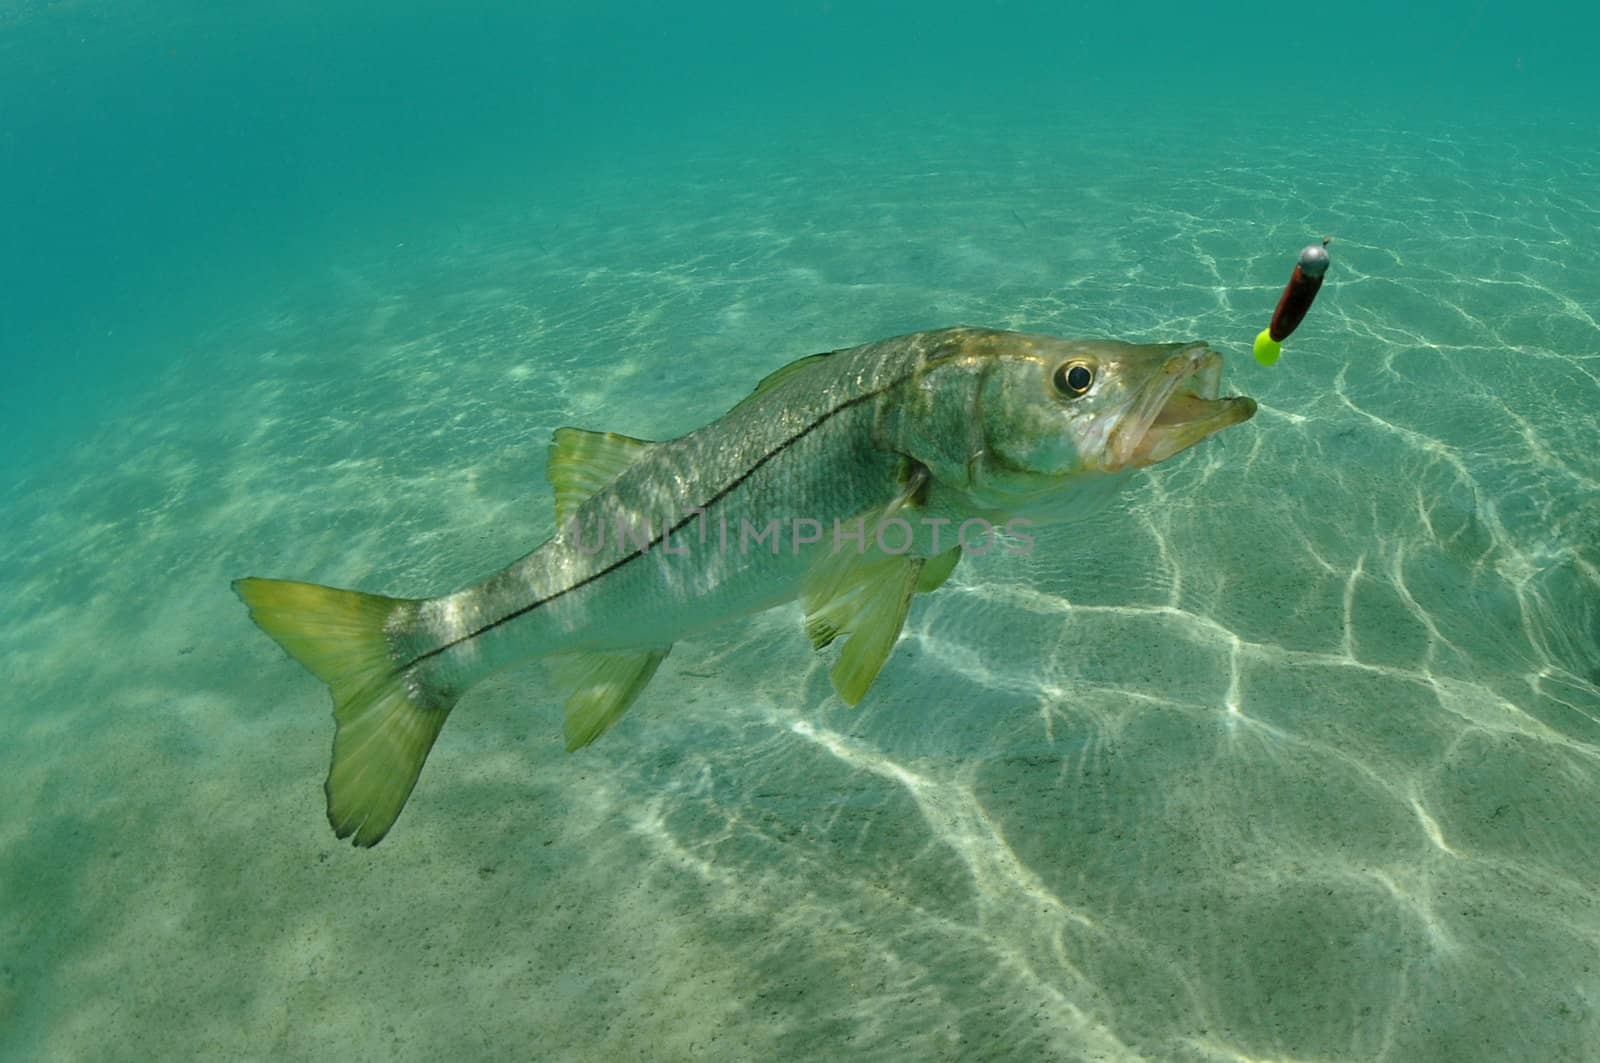 Snook in ocean chasing lure while fishing